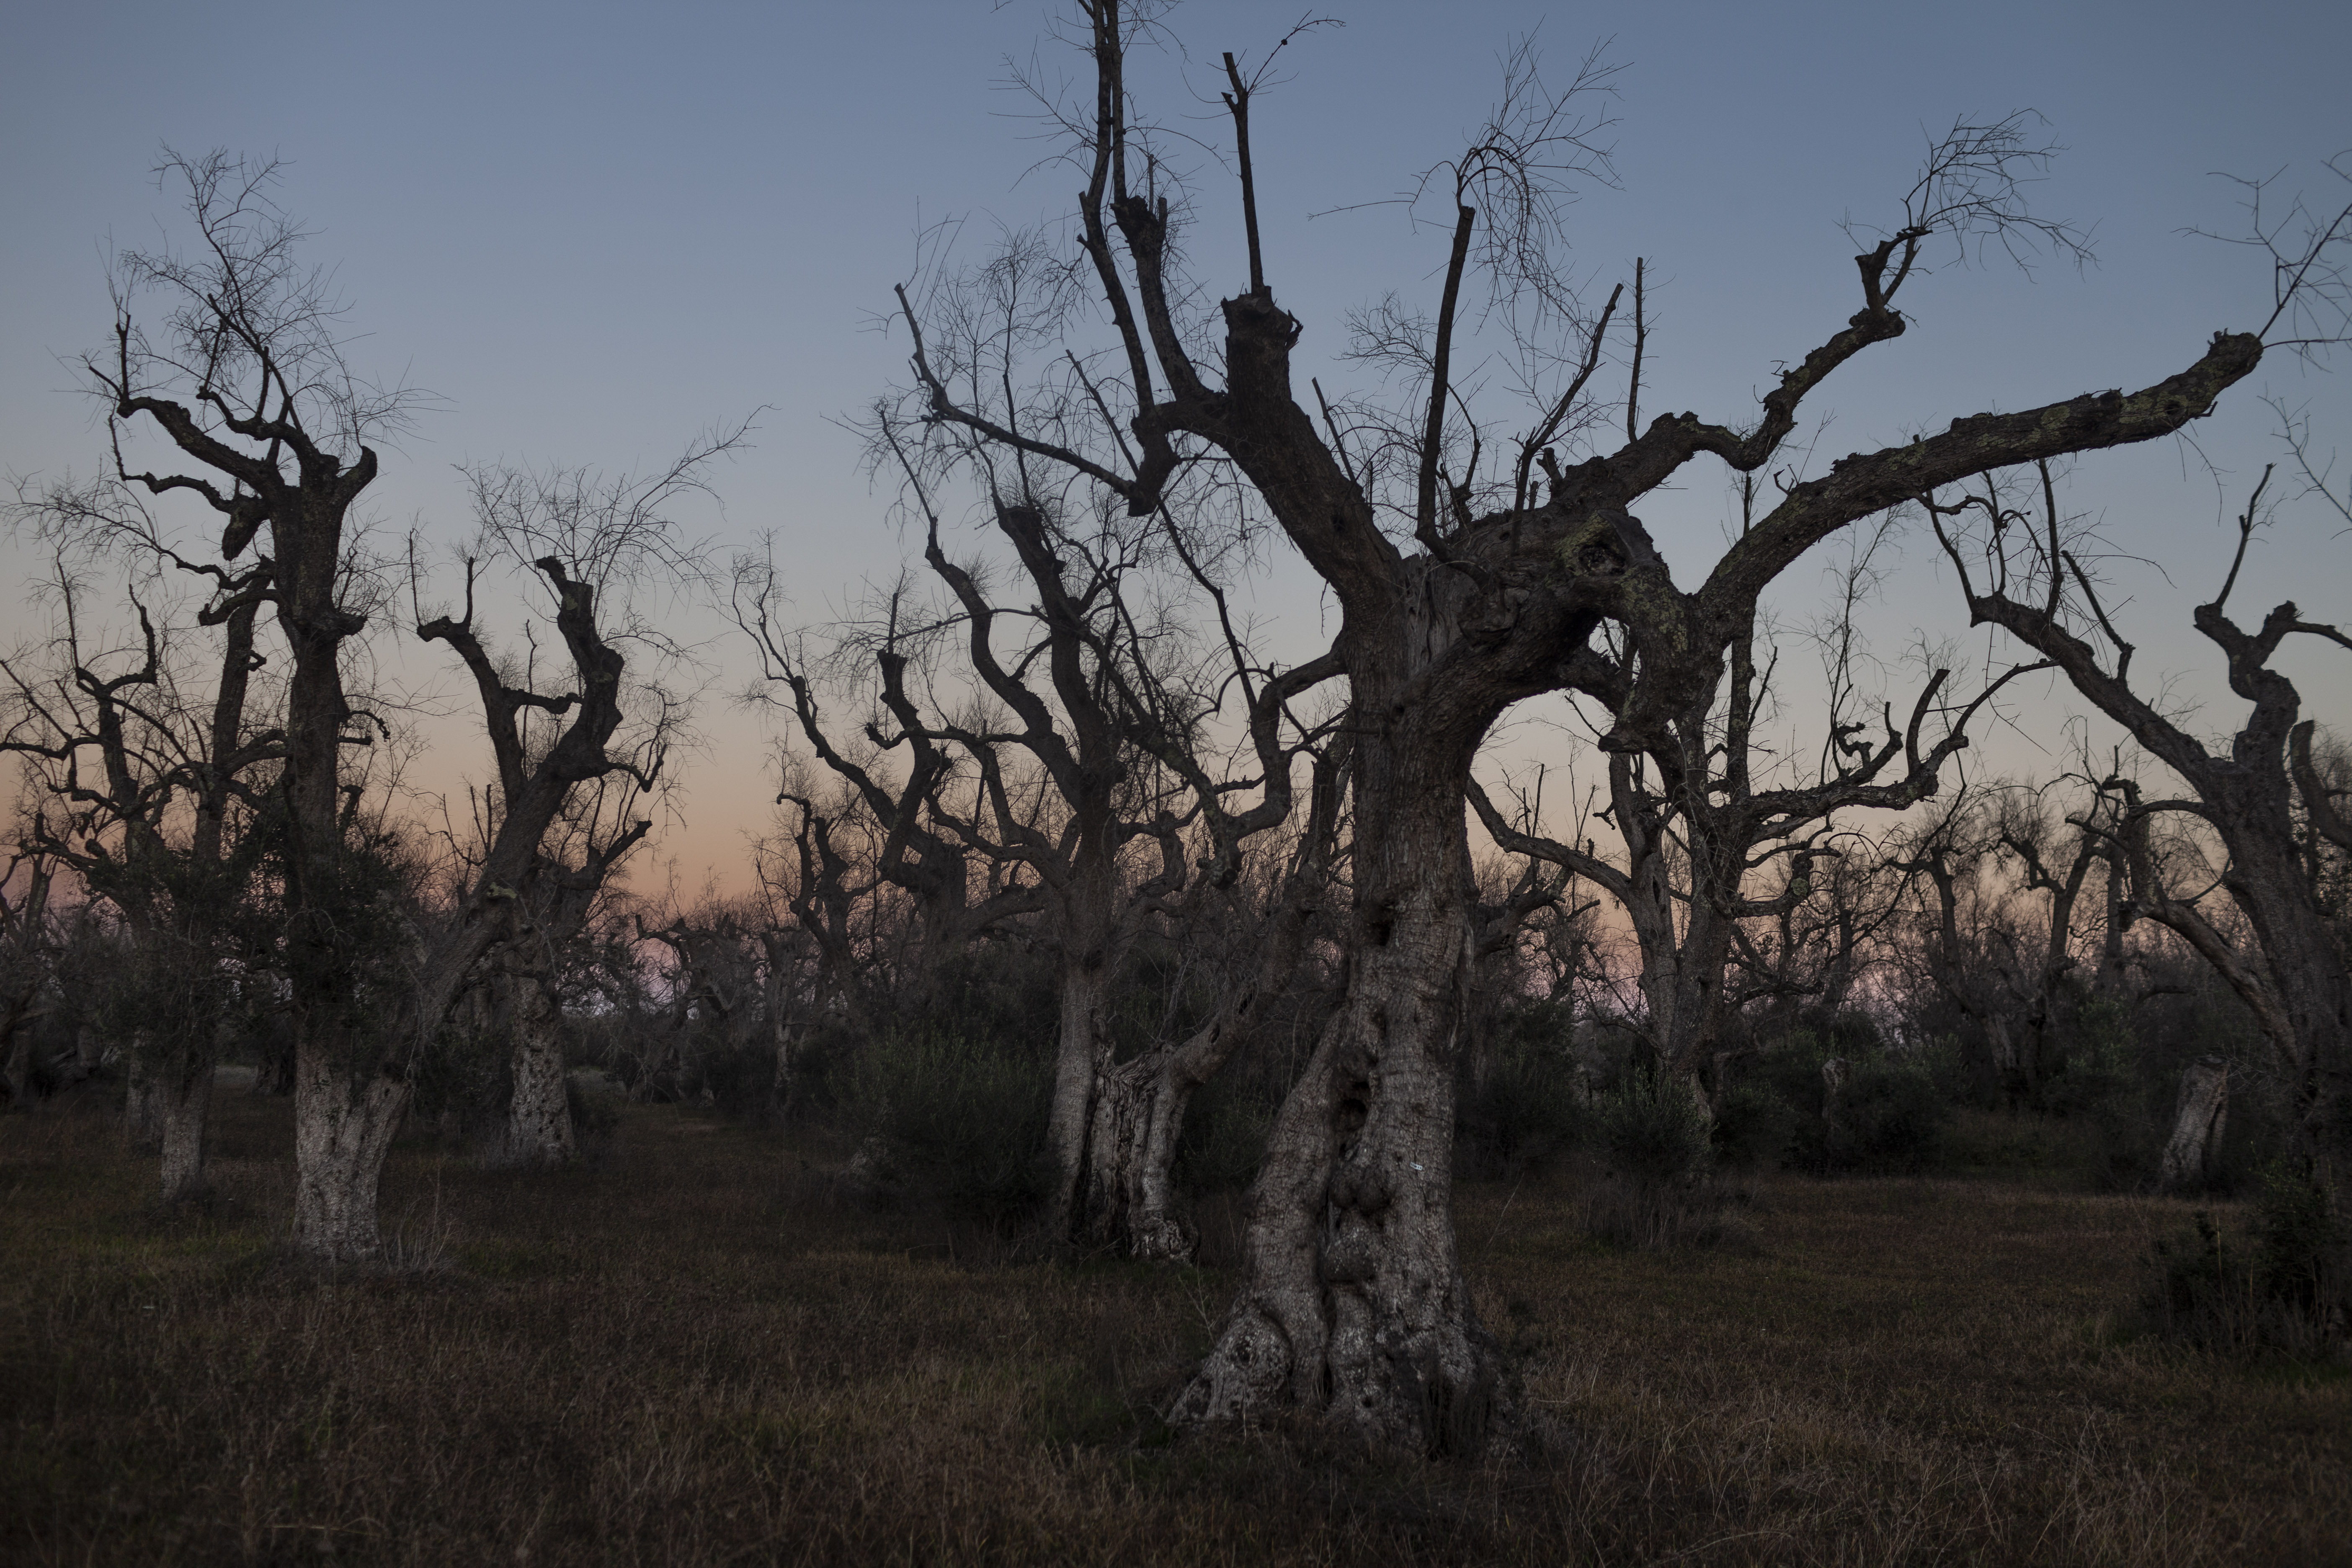 "nSUPERSANO, ITALY - OCTOBER 21: Dead, centuries-old olive trees are seen on October 21, 2021 in the countryside of Supersano, Italy. All across the Salento peninsula, an area known for its olive oil and its ancient olive groves, millions of olive trees have been affected Xylella fastidiosa, a plant bacteria from Central America that over the past ten years has turned an entire province into a cemetery of dead tree trunks. (Photo by Janos Chiala/Getty Images) 2021-11-20 17:38:19 ILSOLE24ORE QUOTIDIANO